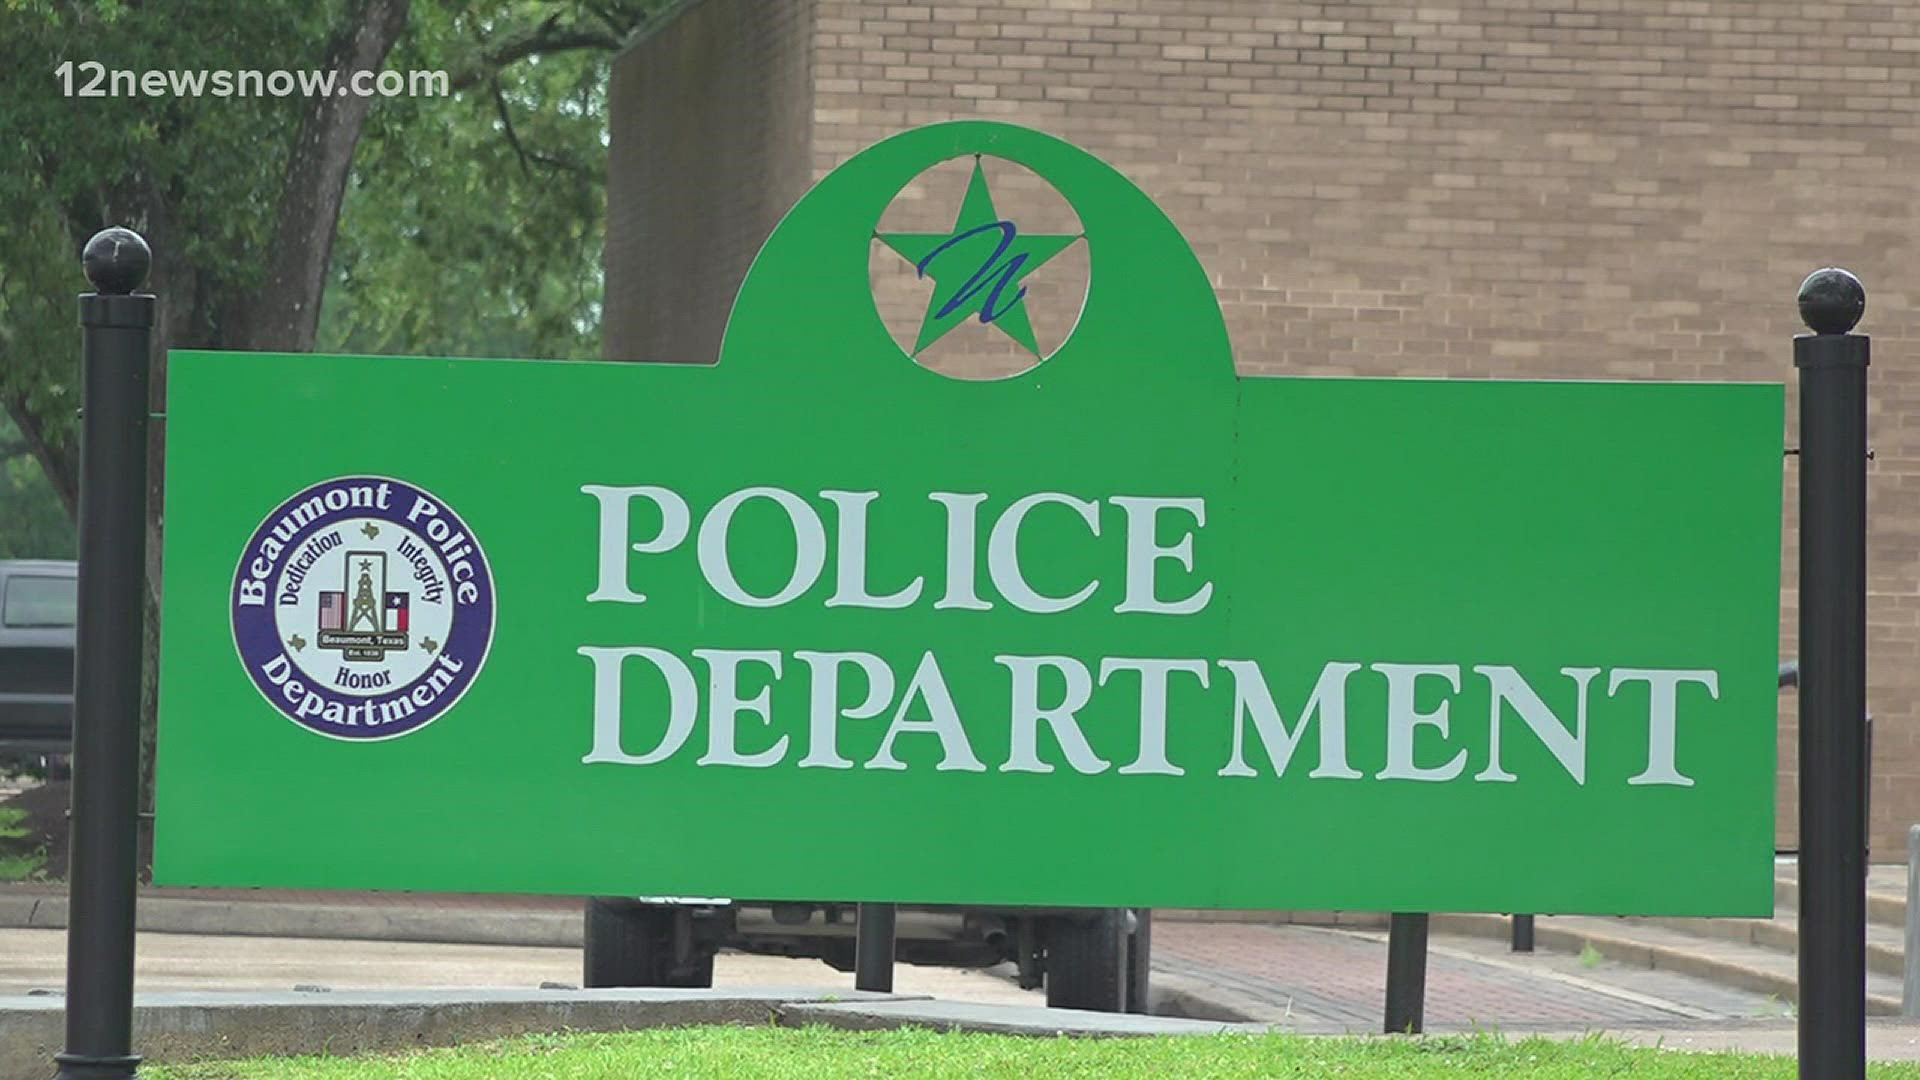 Beaumont Police told 12News Thursday that the department stands by the actions of the officer.